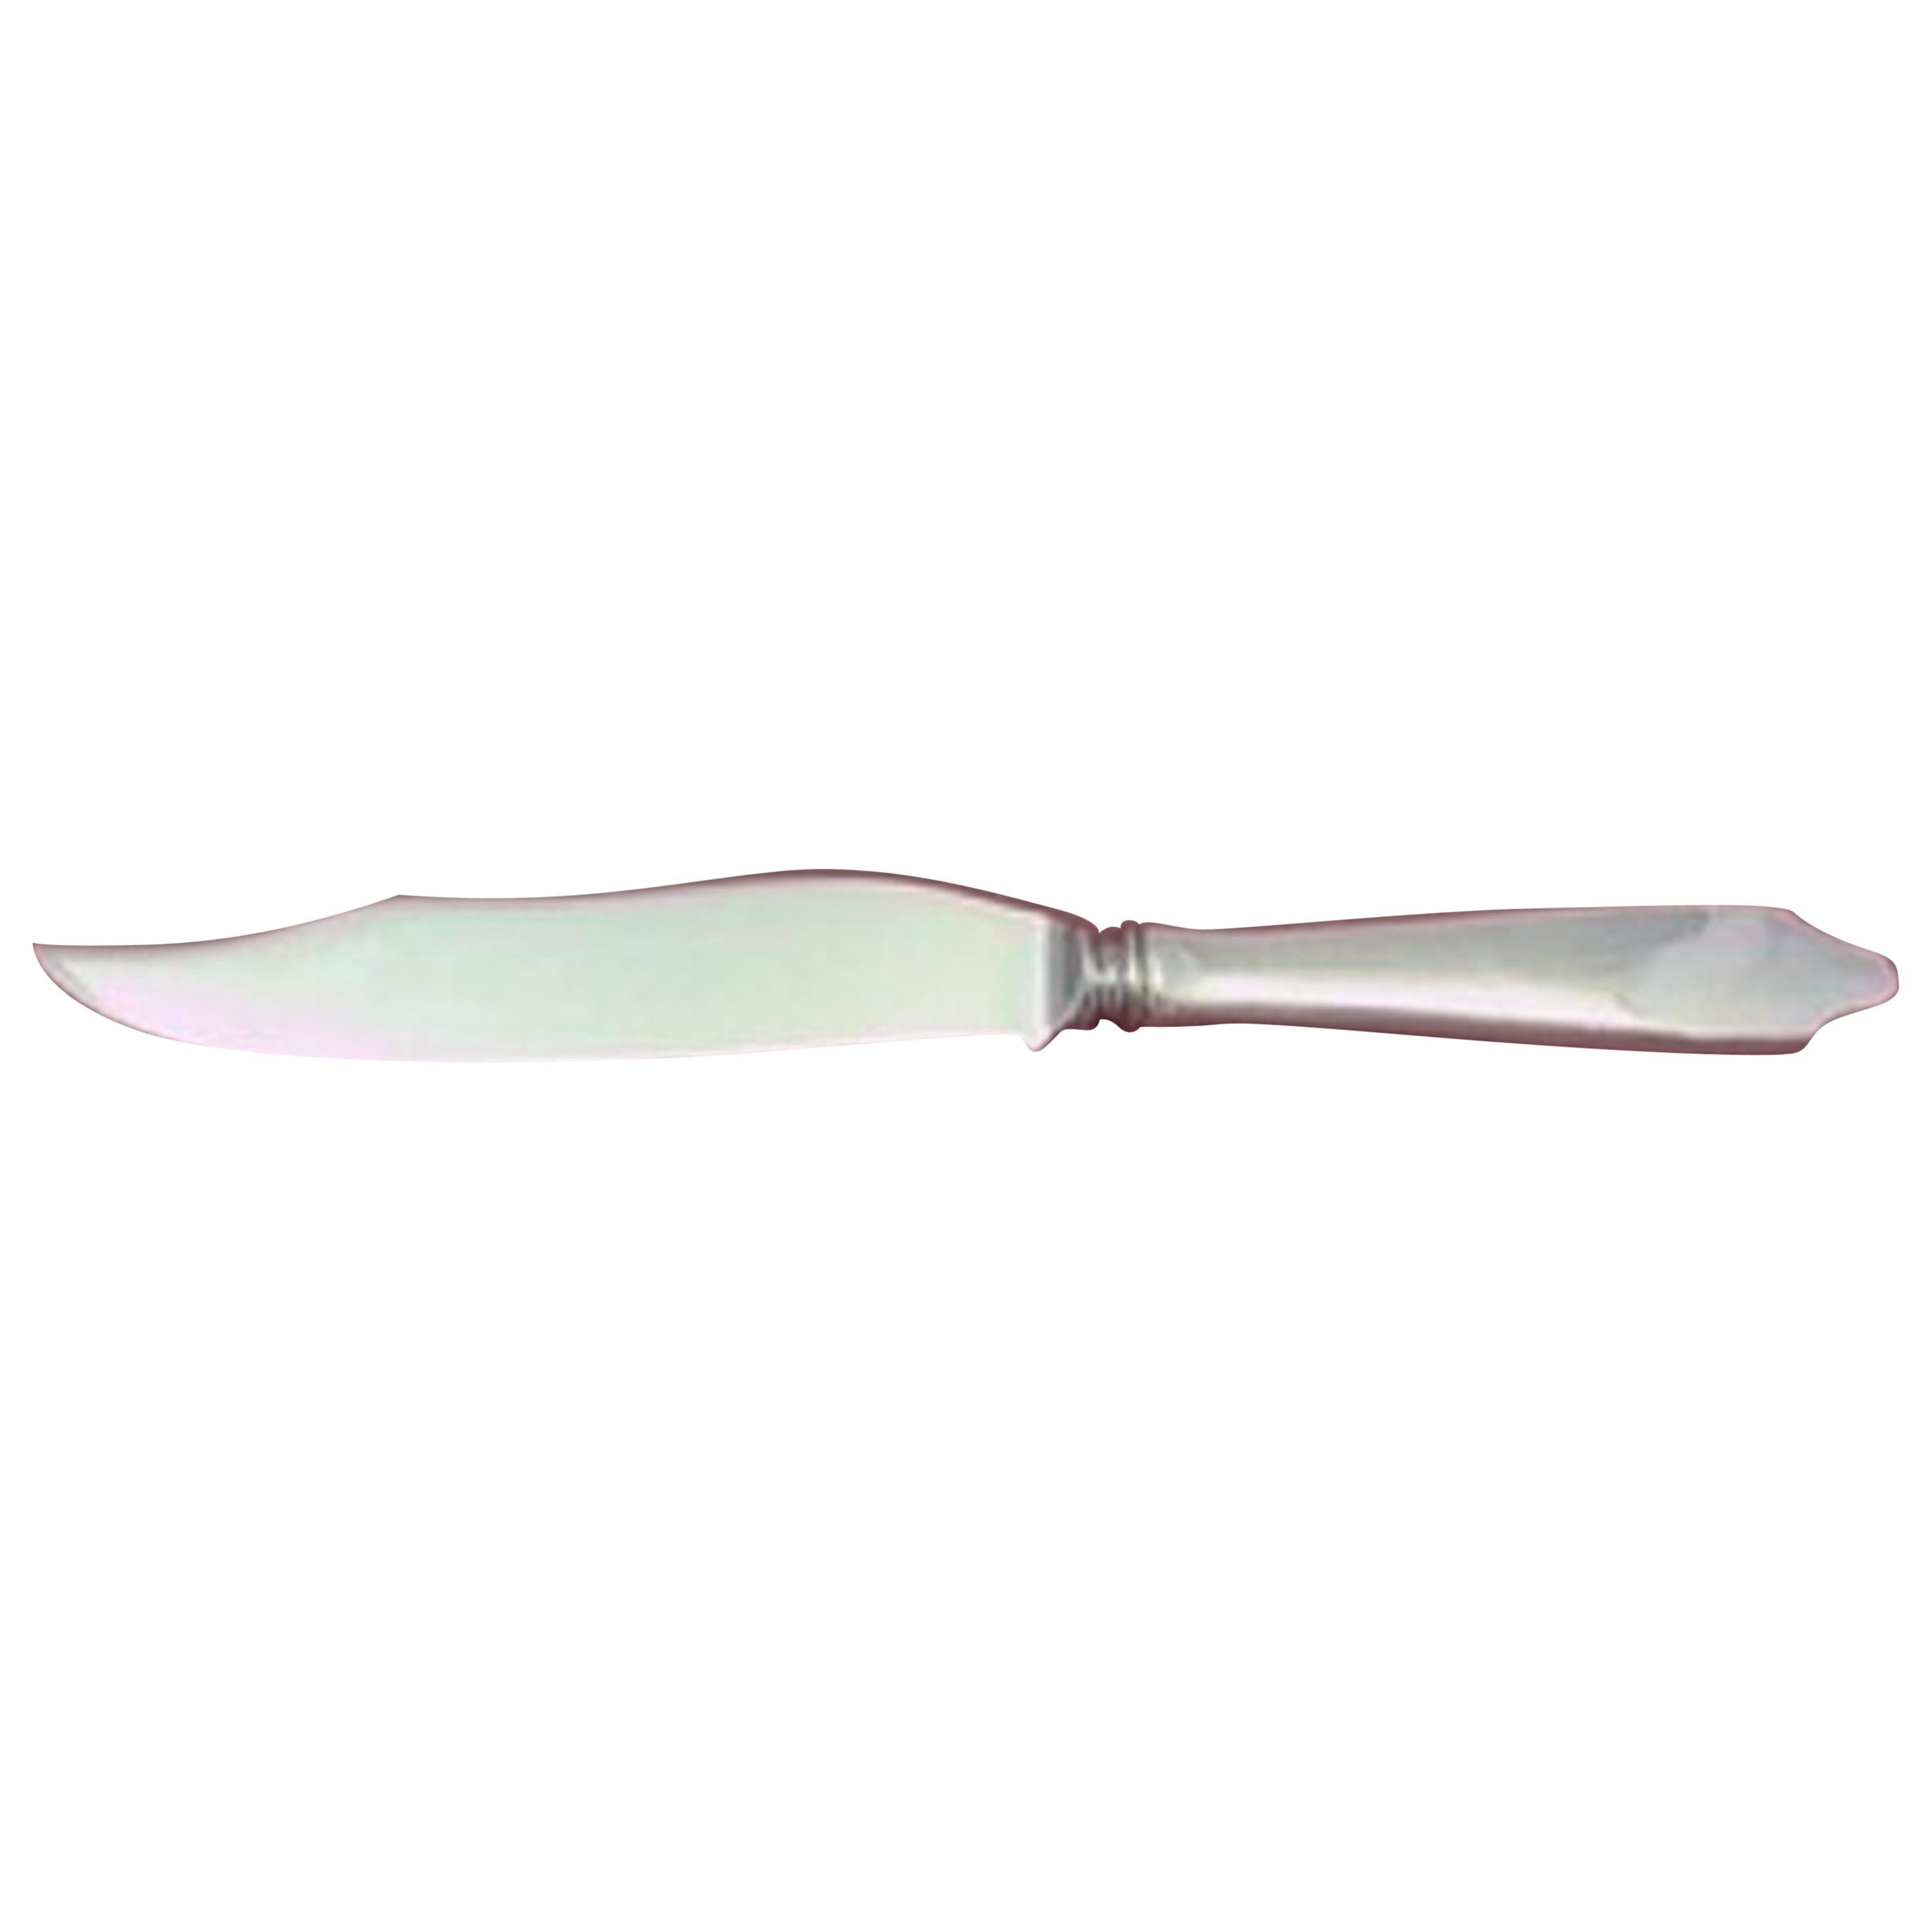 Clinton by Tiffany & Co. Sterling Silver Fish Knife with Stainless 8"